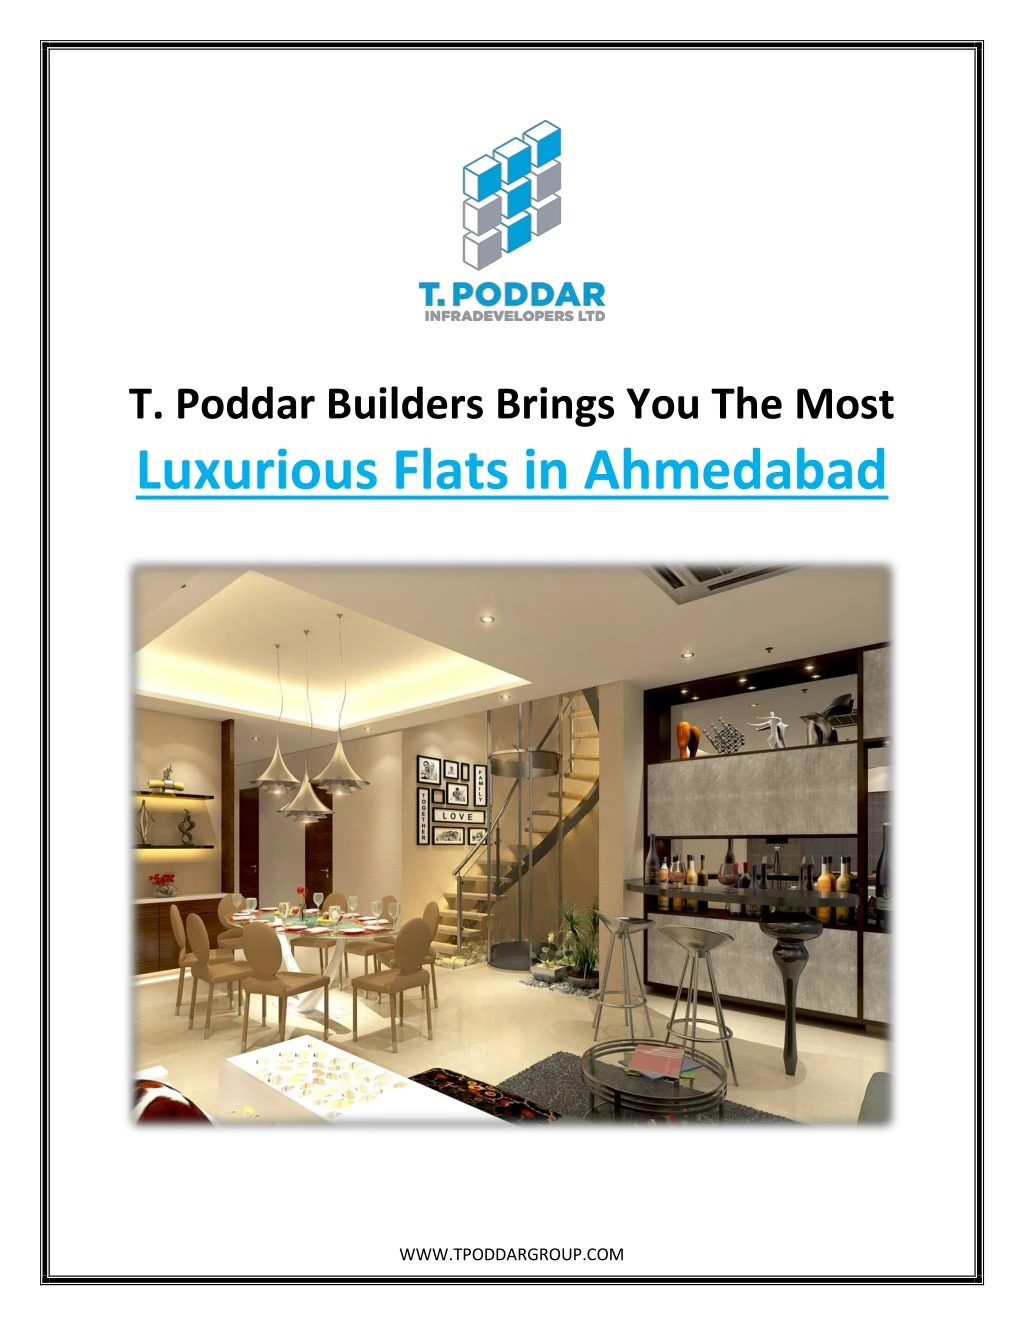 t poddar builders brings you the most luxurious